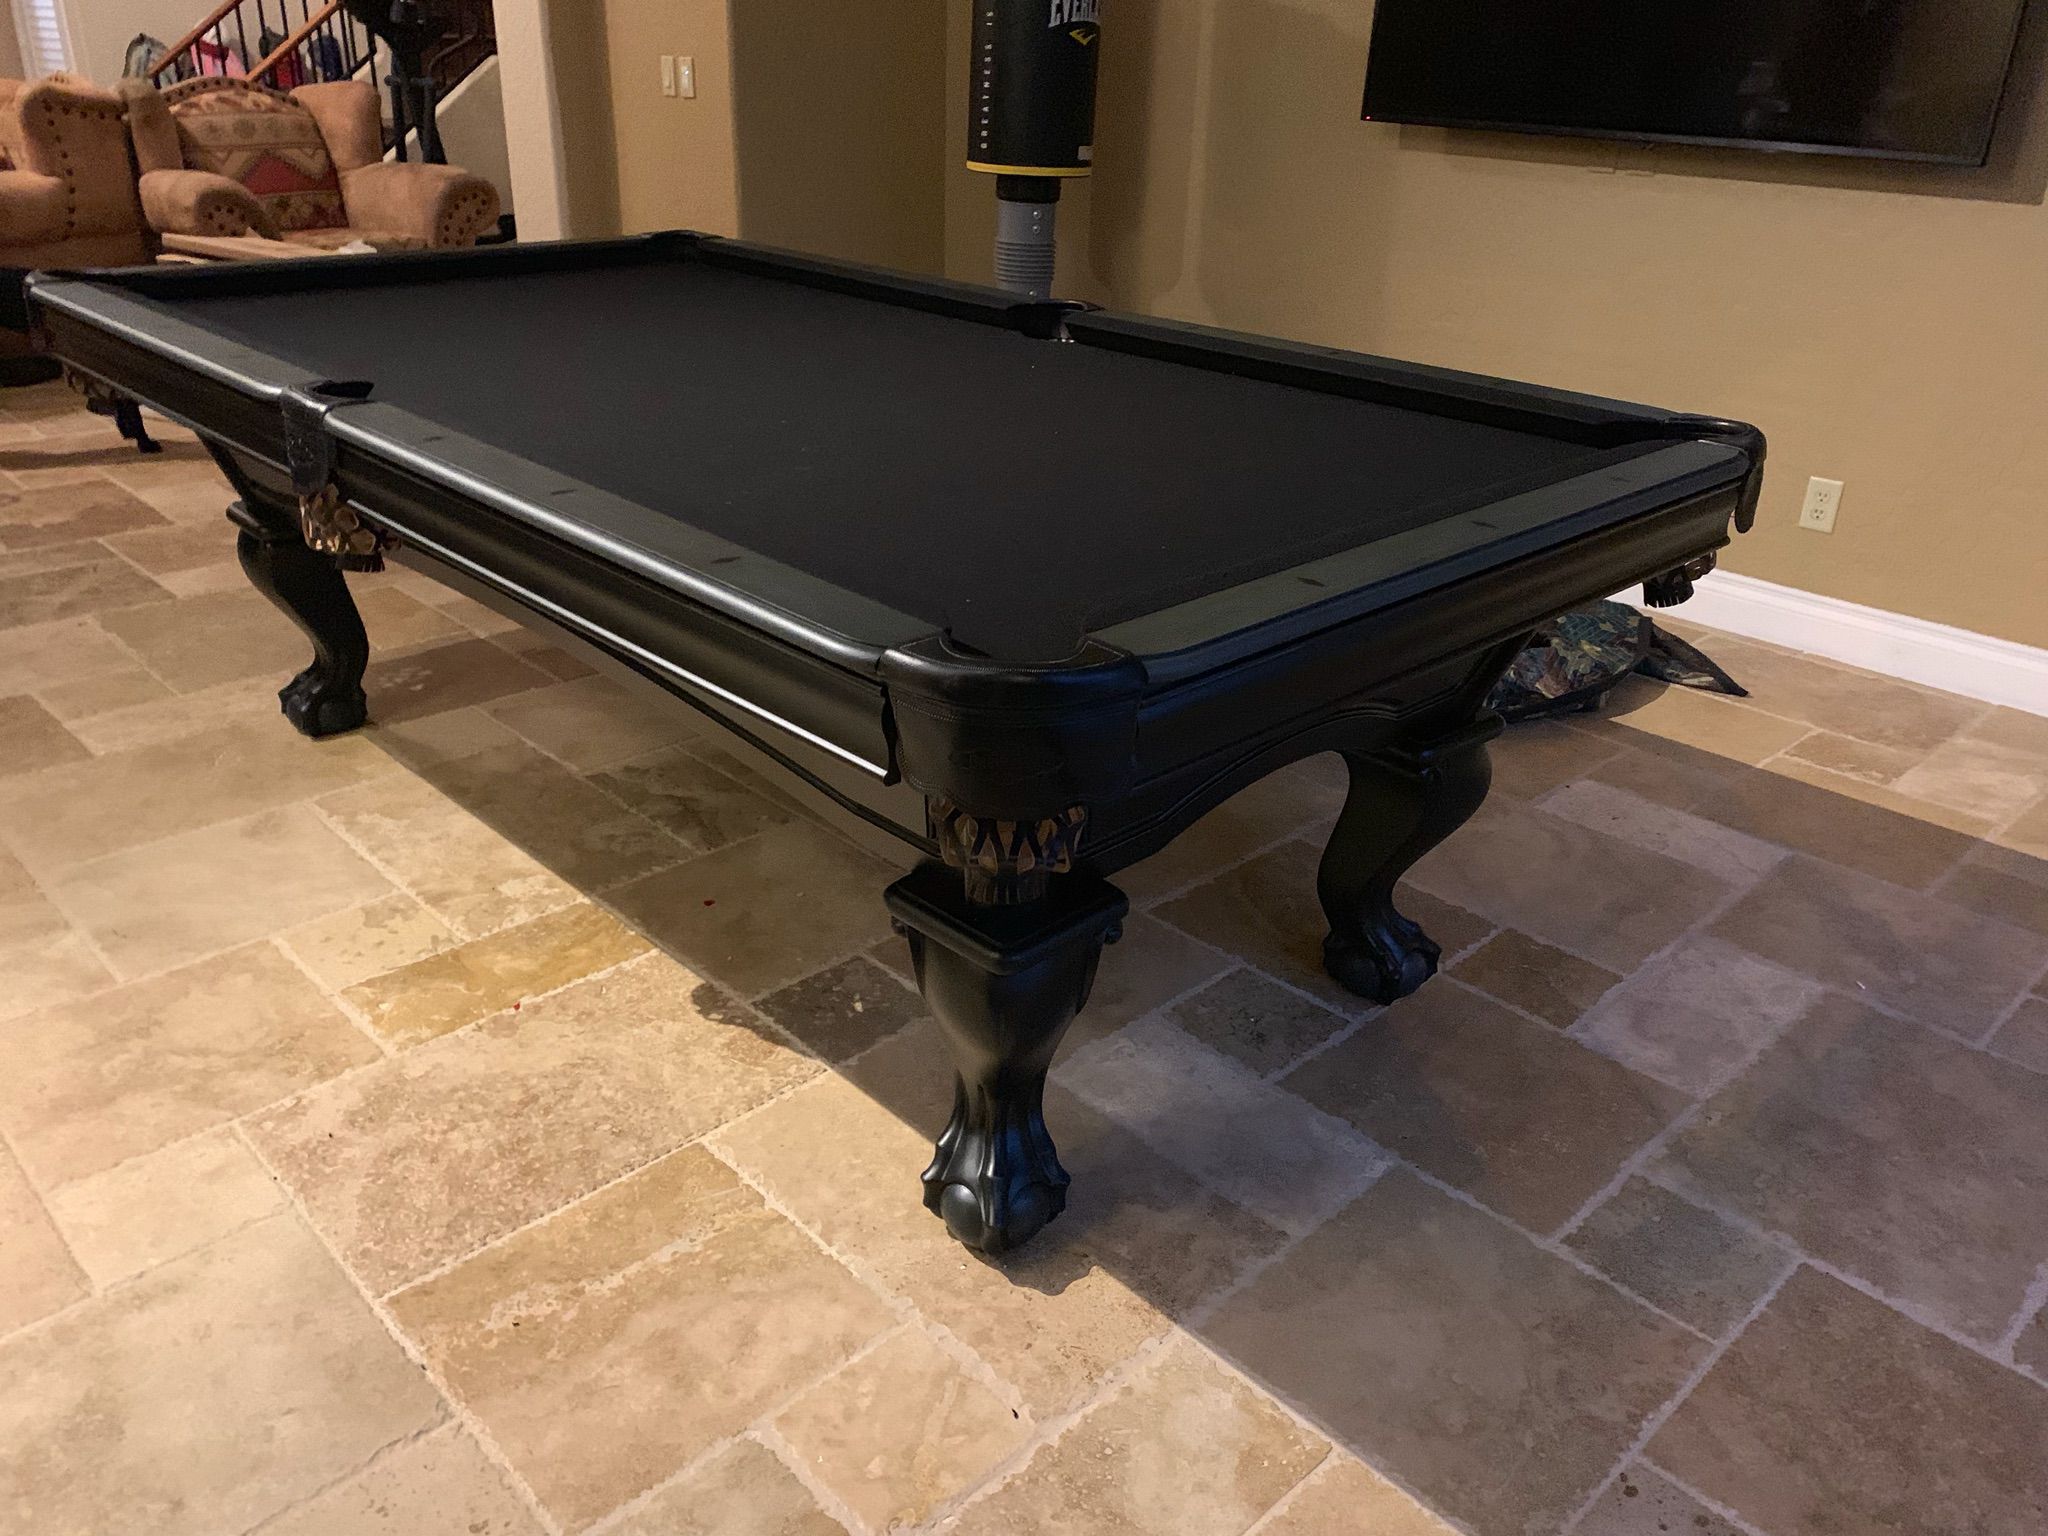 New 8ft Pool table. Same day delivery! Low monthly finance of 170$